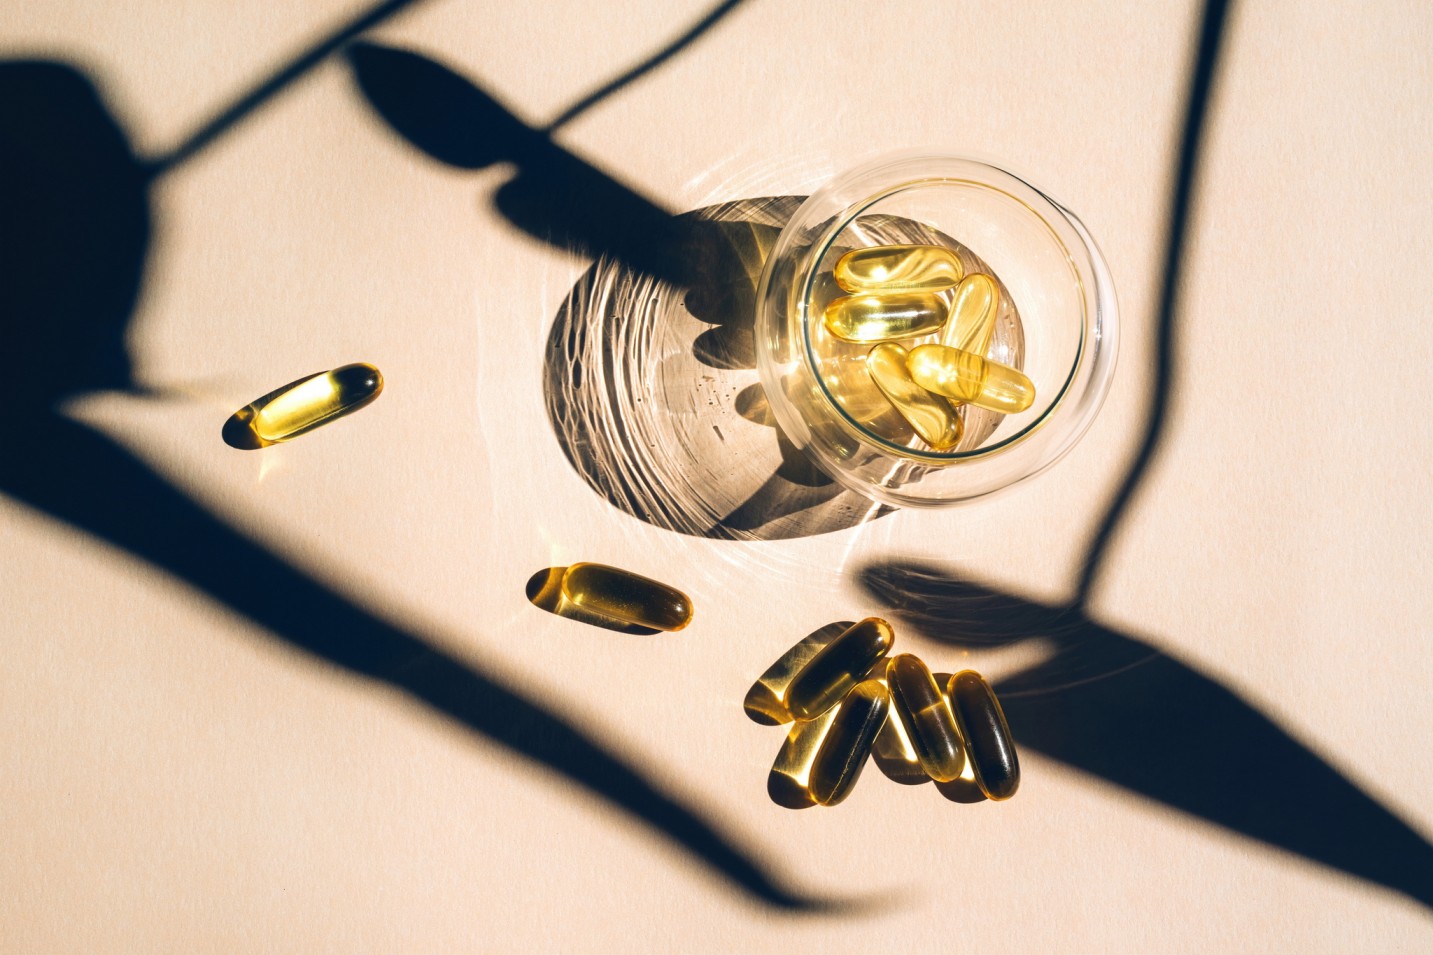 capsules-fish-oil-omega-3-in-glass-cup-with-a-shad-2021-08-29-09-31-26-utc_50.jpg